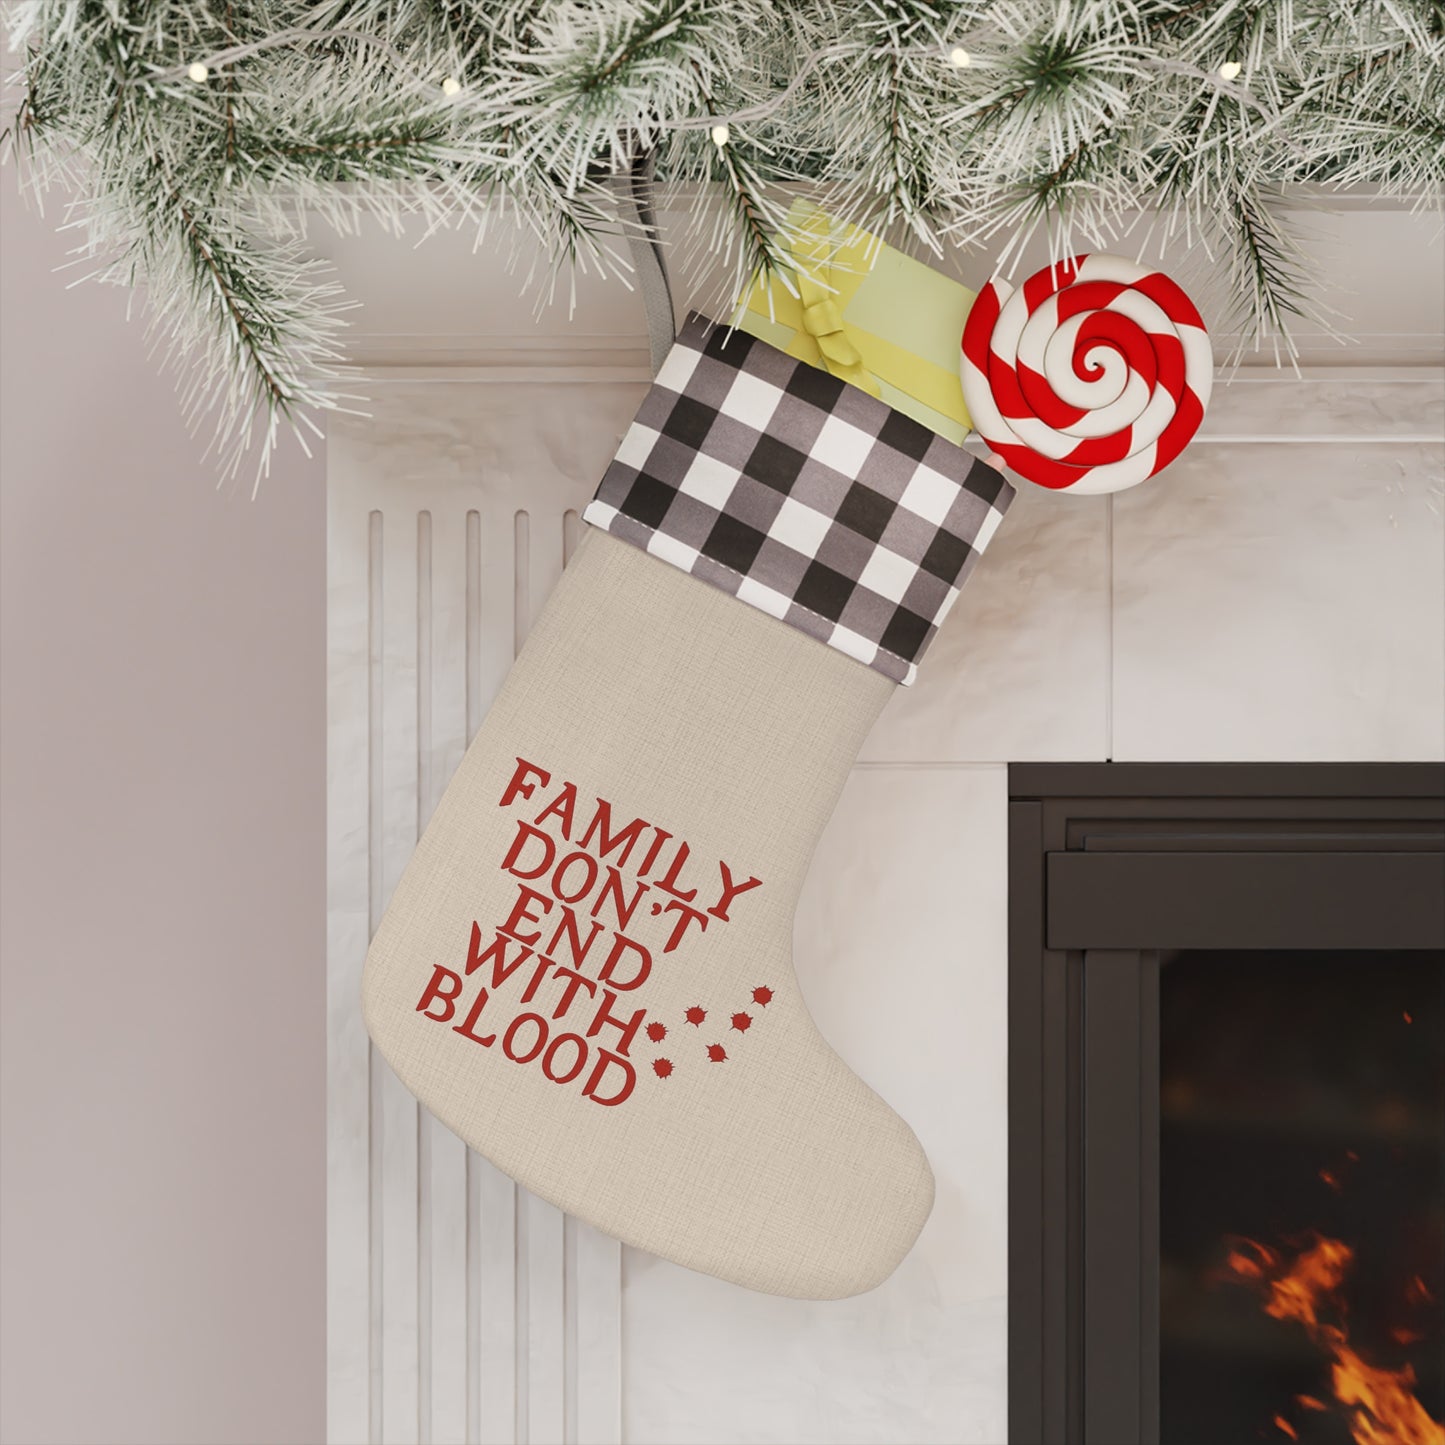 Family don't end Christmas Stocking